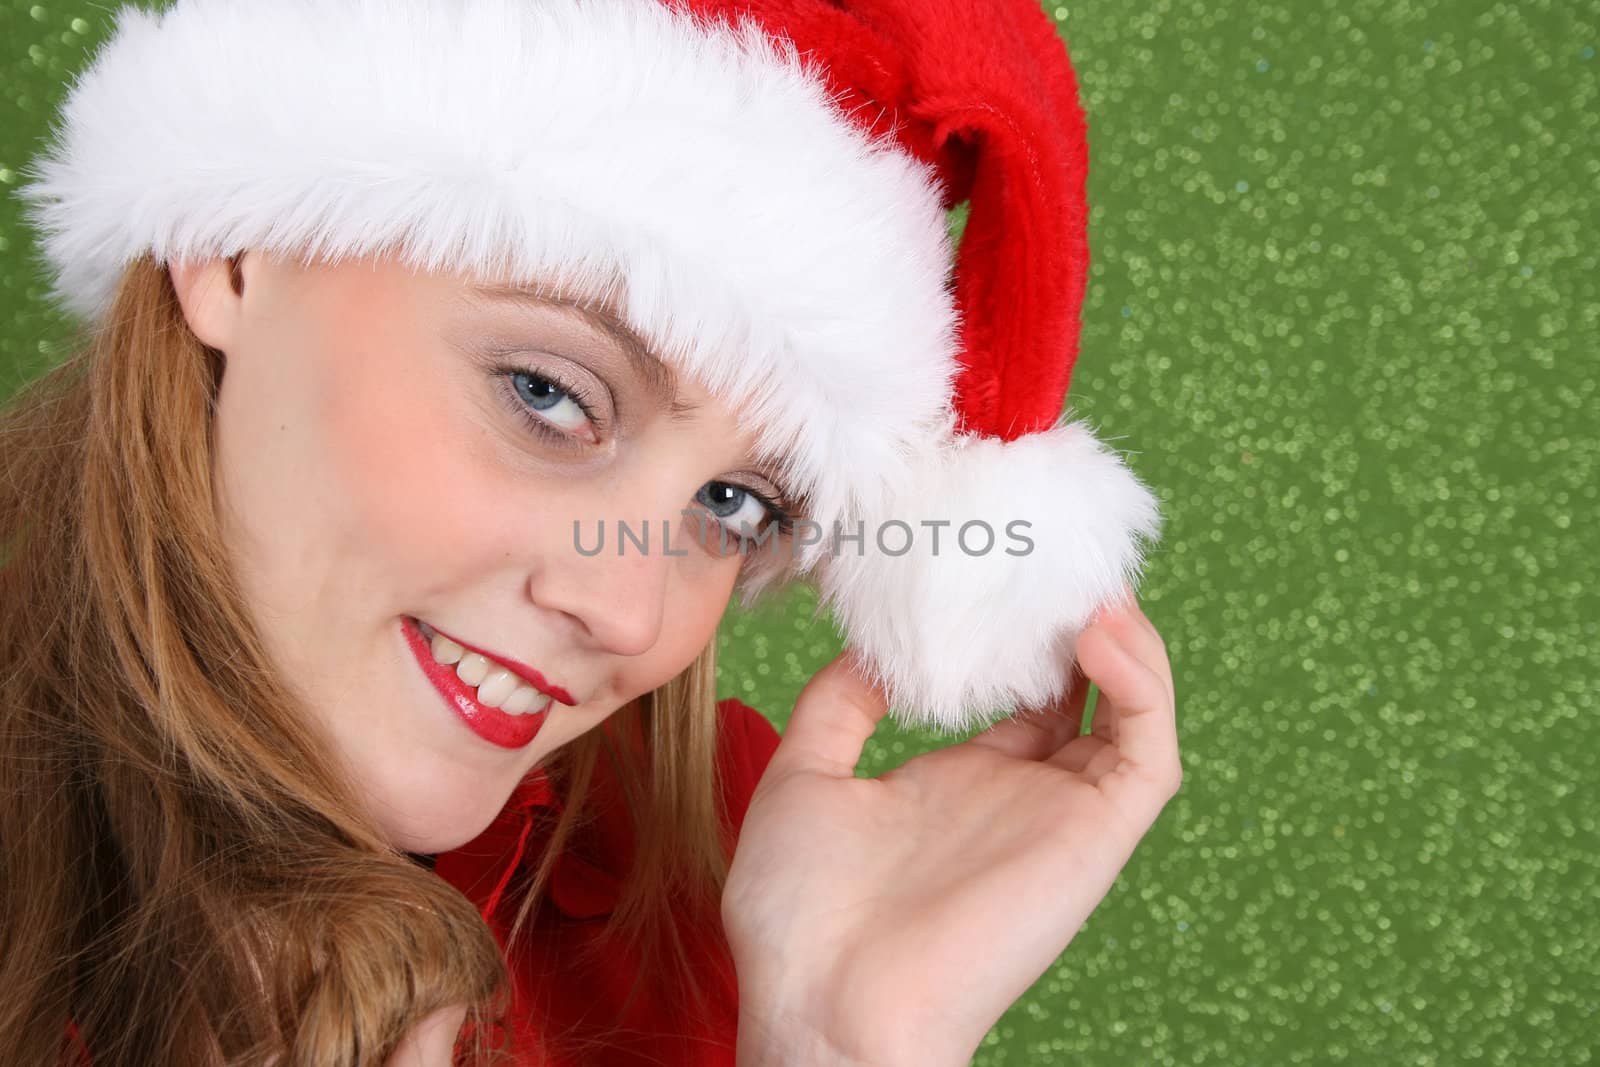 Female Model with red lips wearing a christmas hat